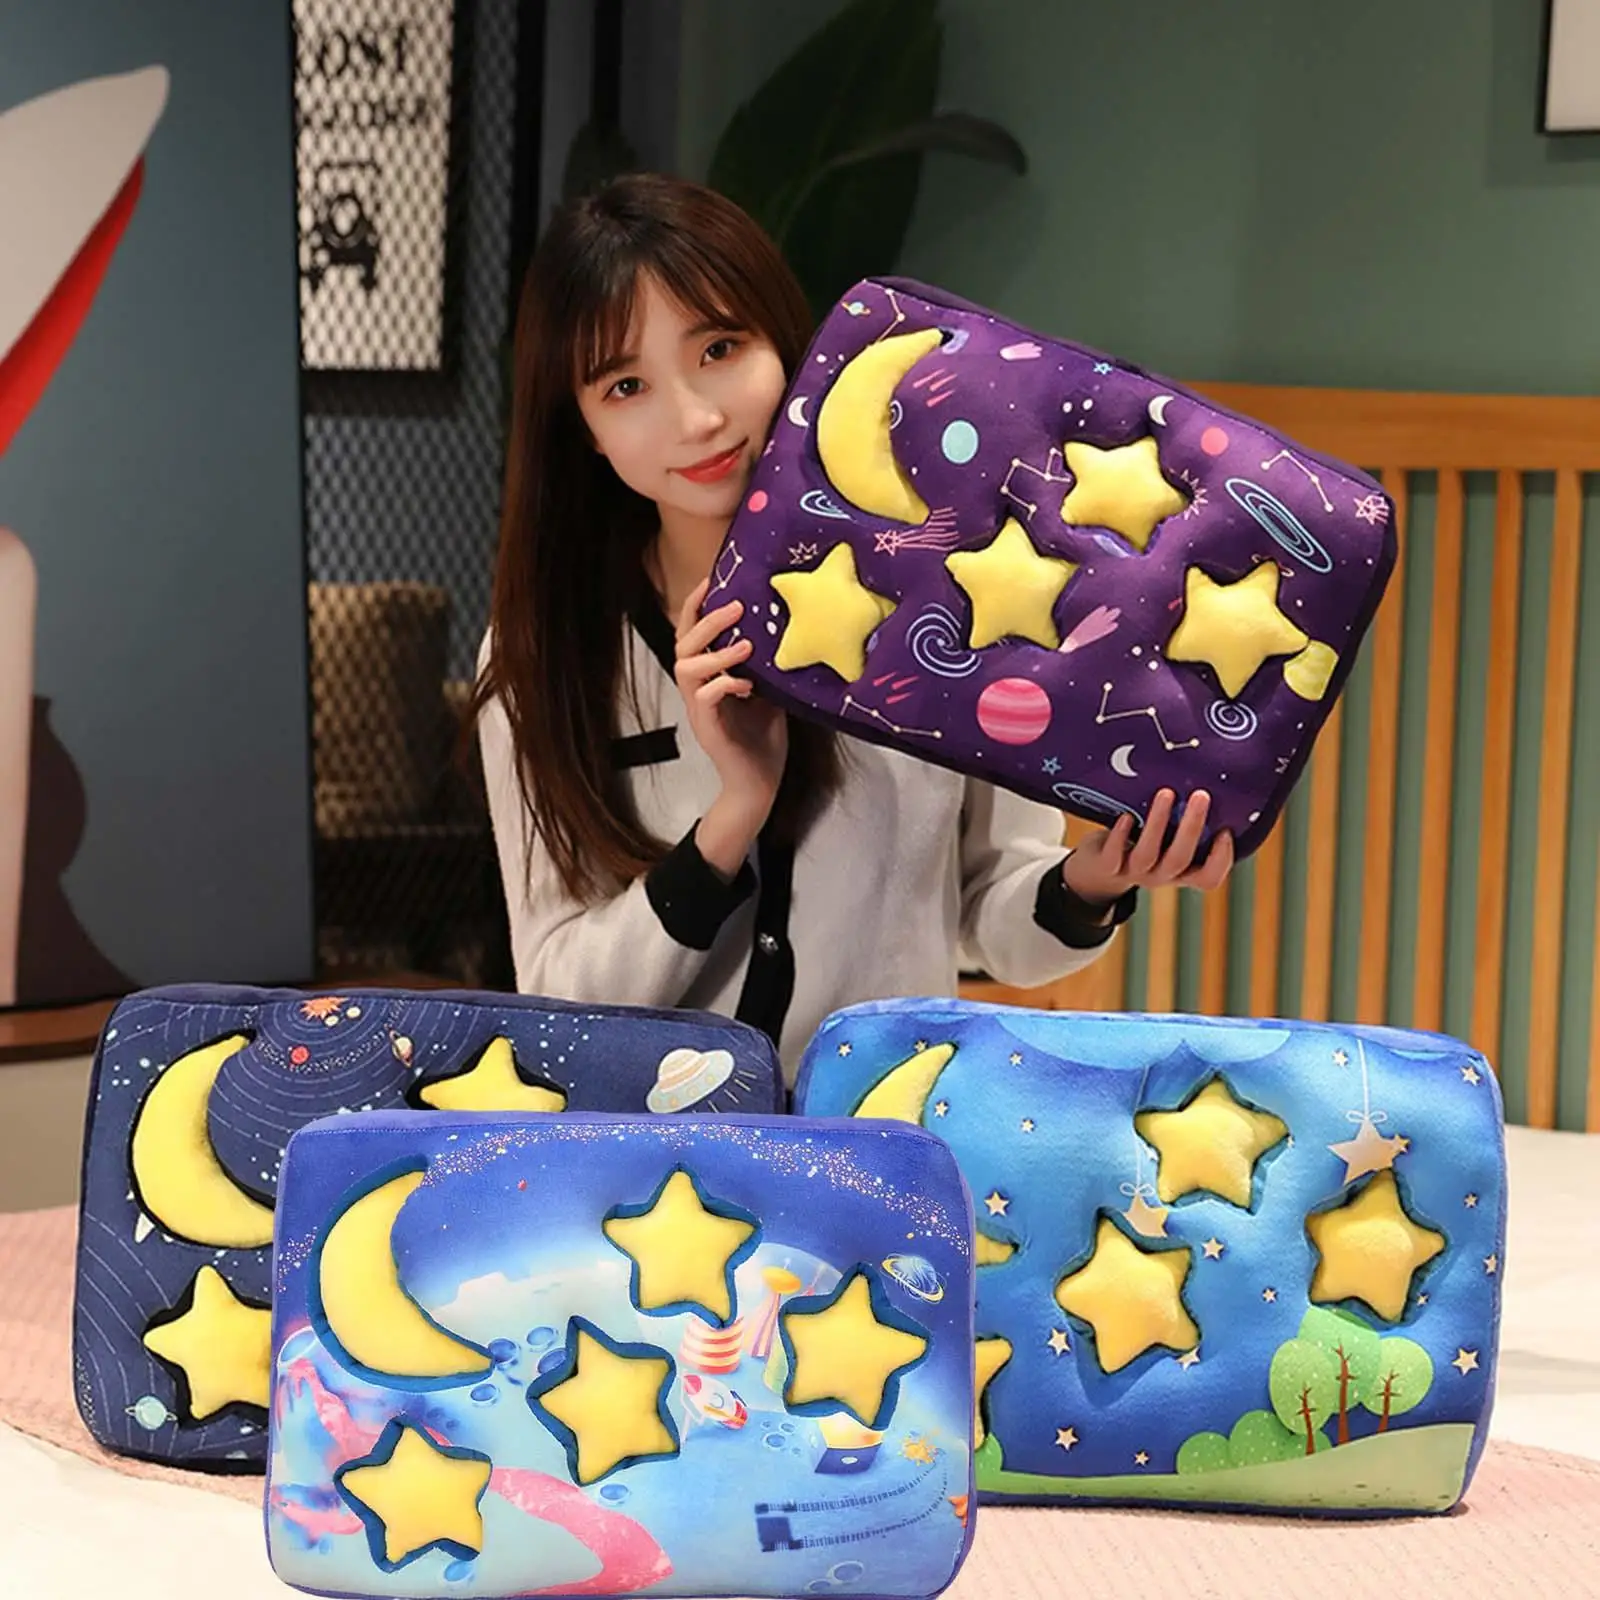 Sky Series Star Moon Child Safety  Sky Decor Plush Dolls Throw  Stuffed Plush Toy for Livingroom Kids Toddlers Baby